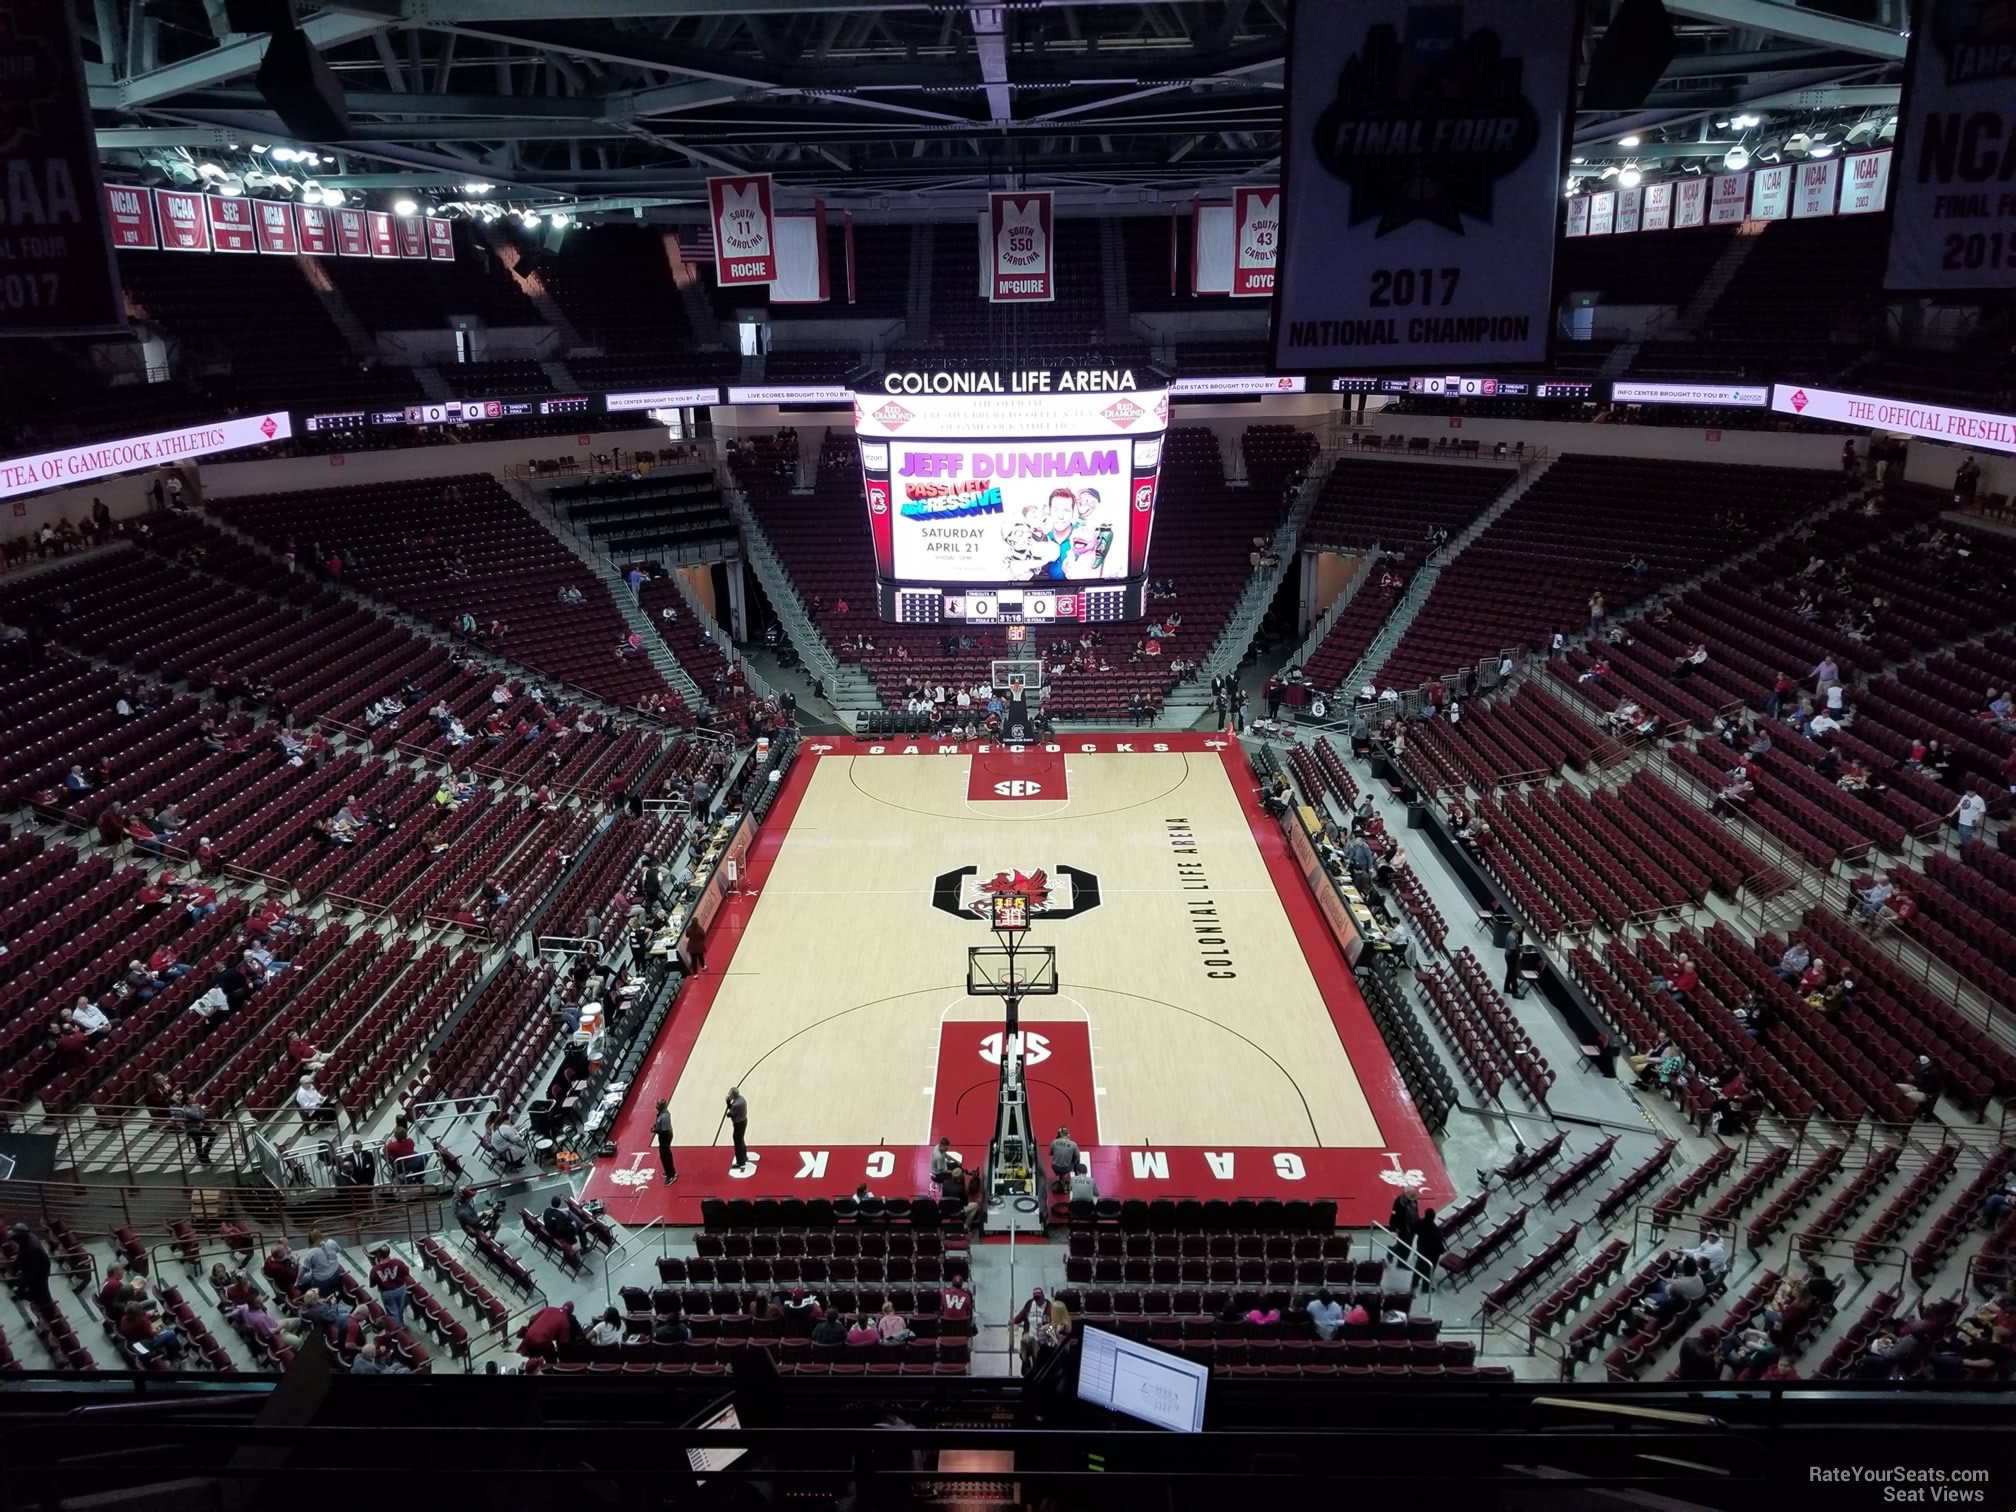 section 201, row 7 seat view  for basketball - colonial life arena